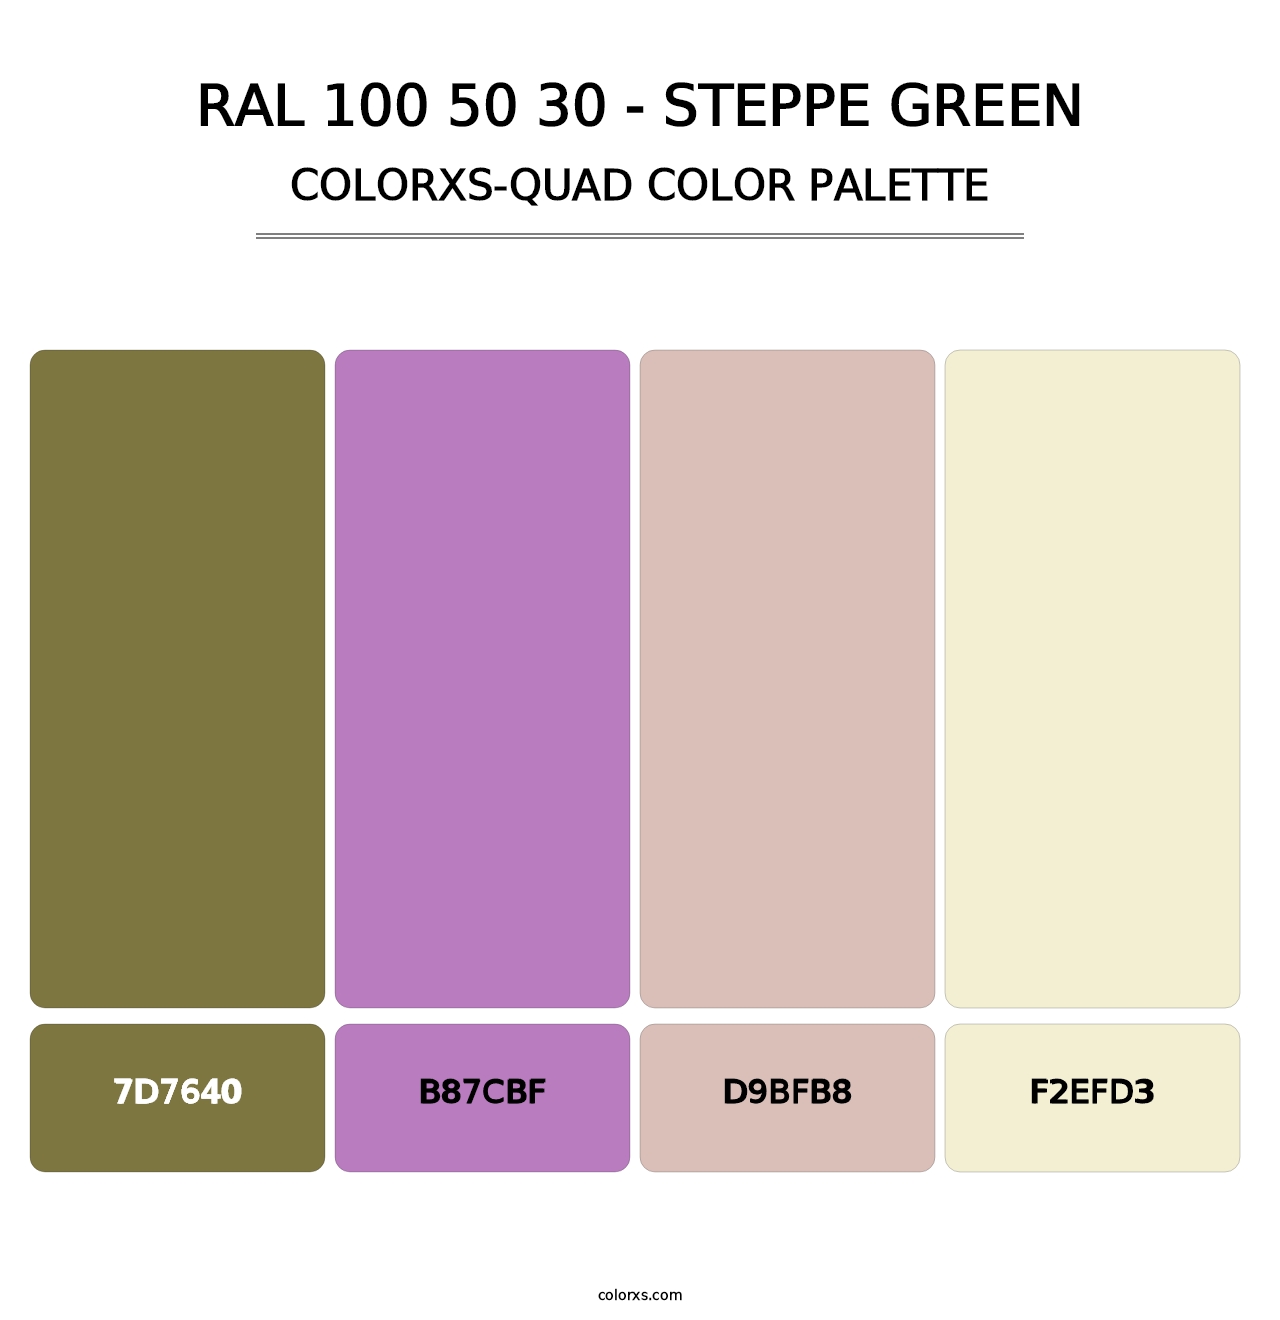 RAL 100 50 30 - Steppe Green - Colorxs Quad Palette